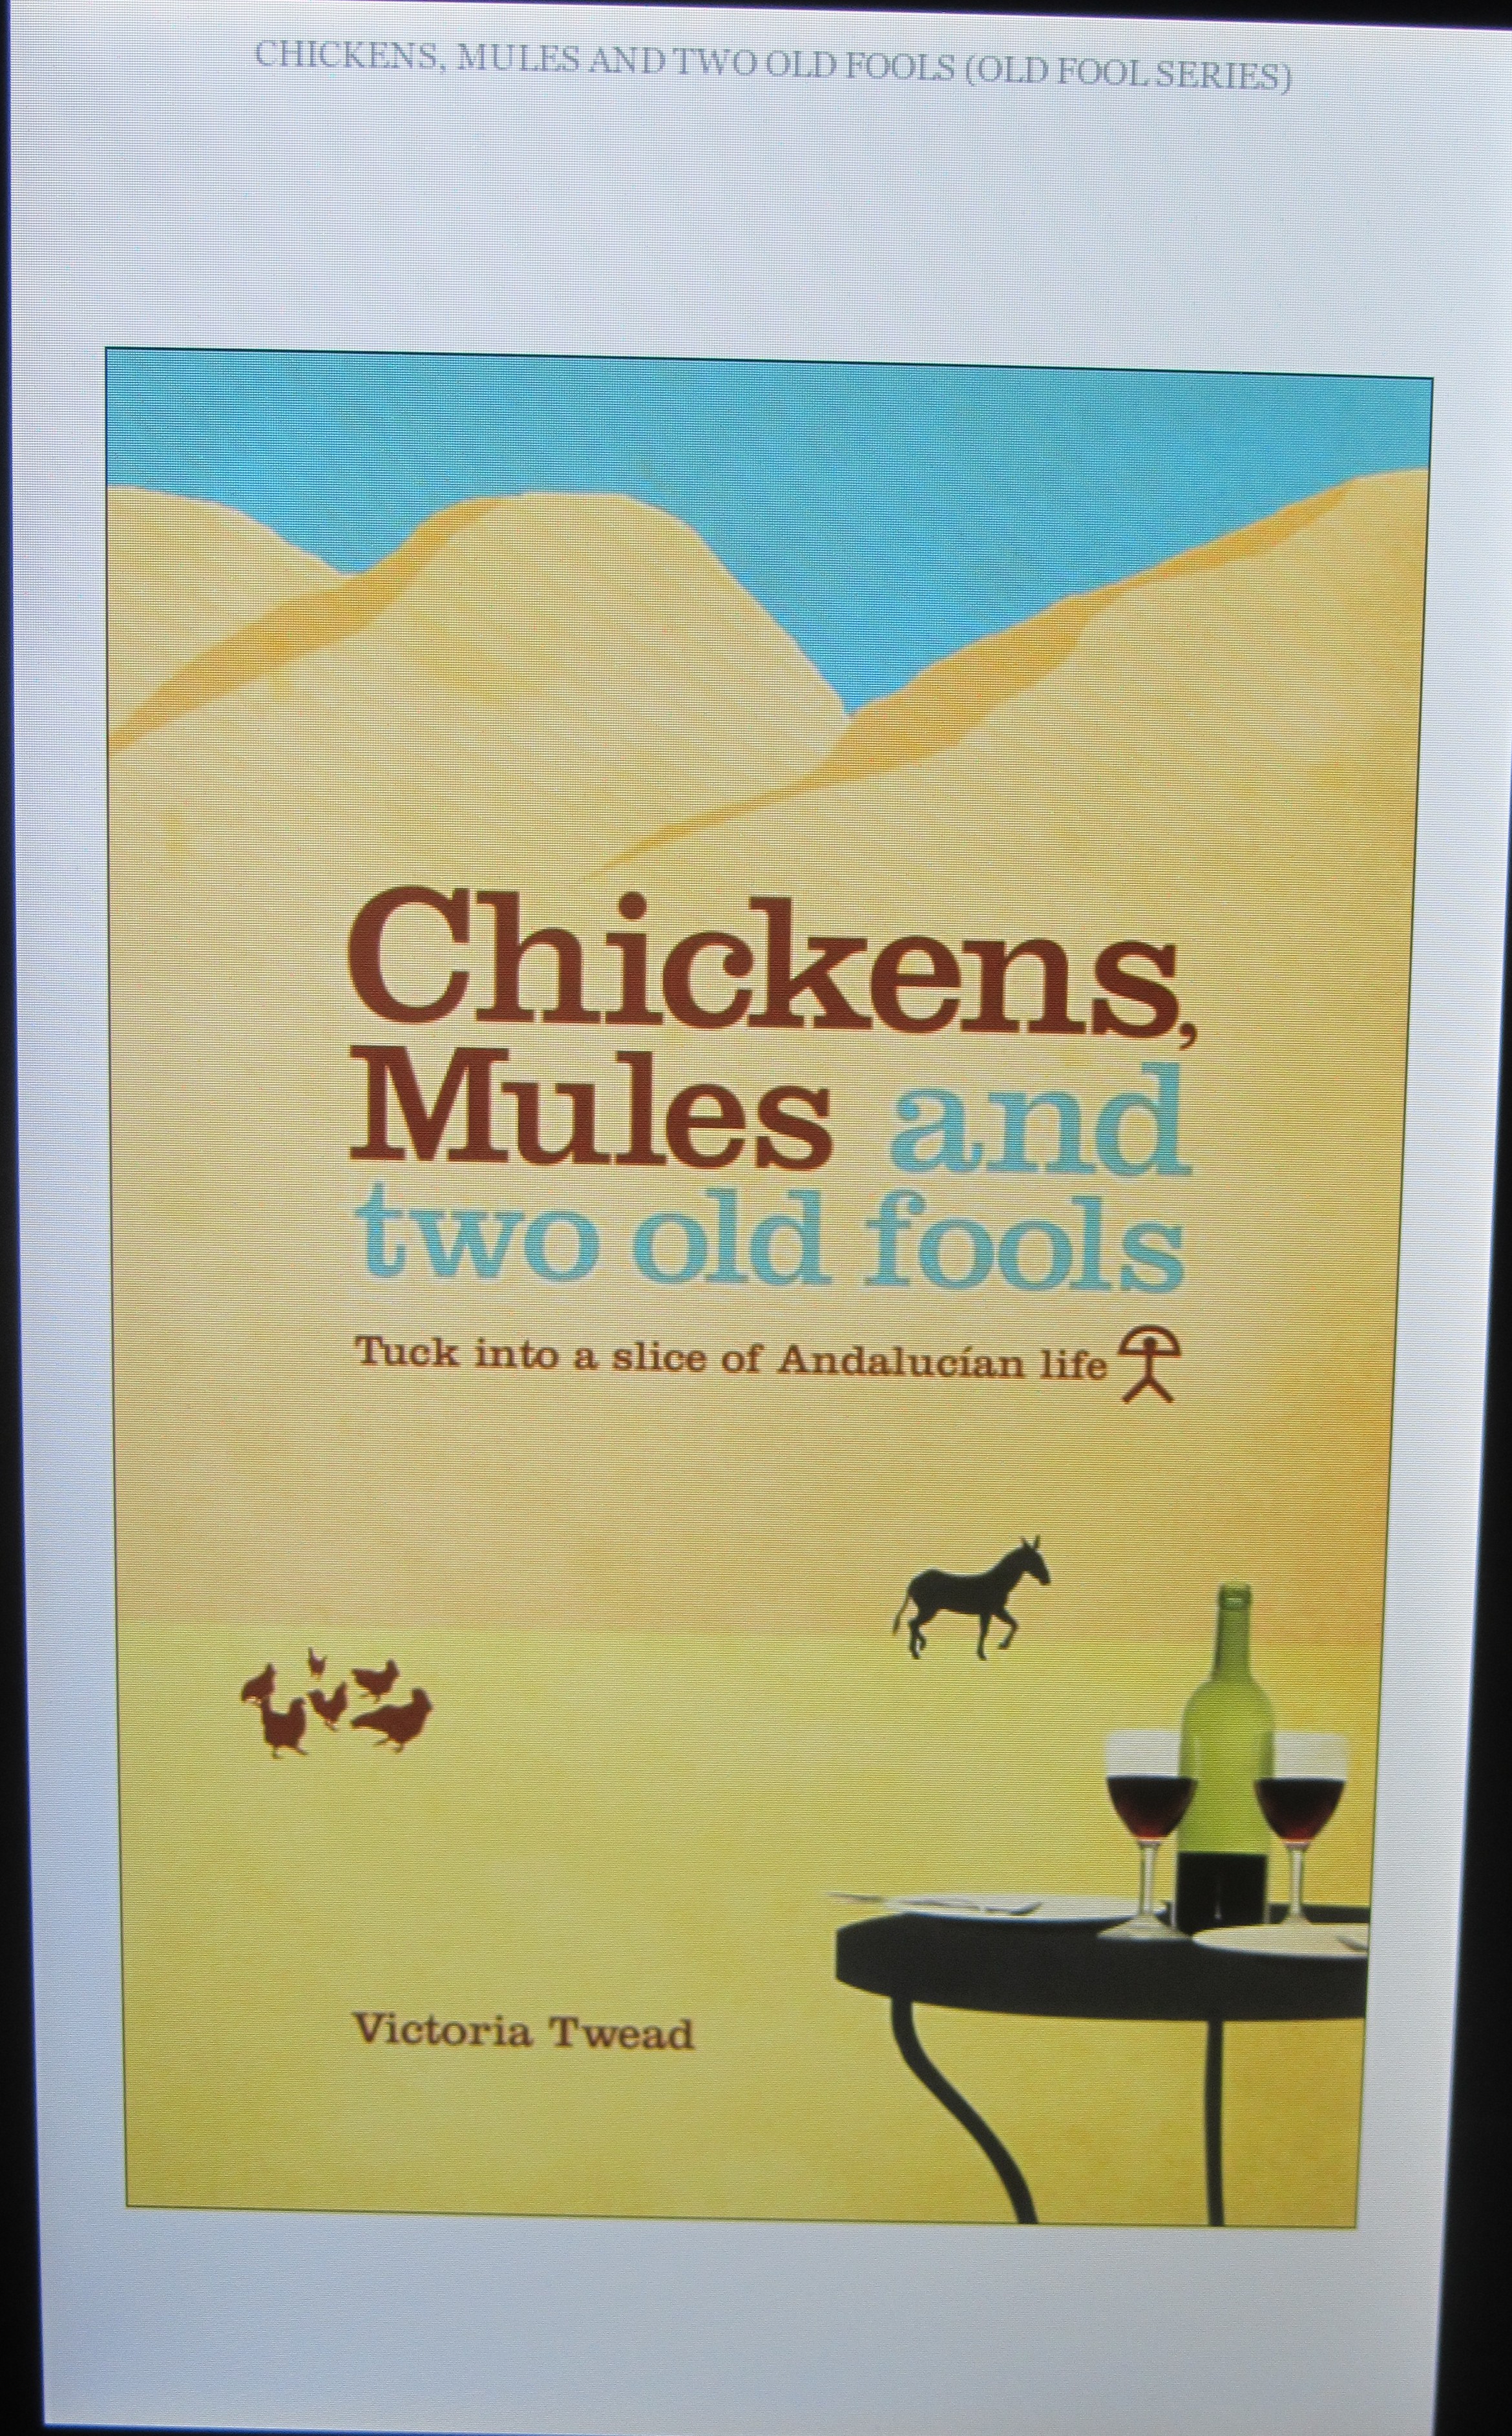 Chickens, Mules and two Old Fools